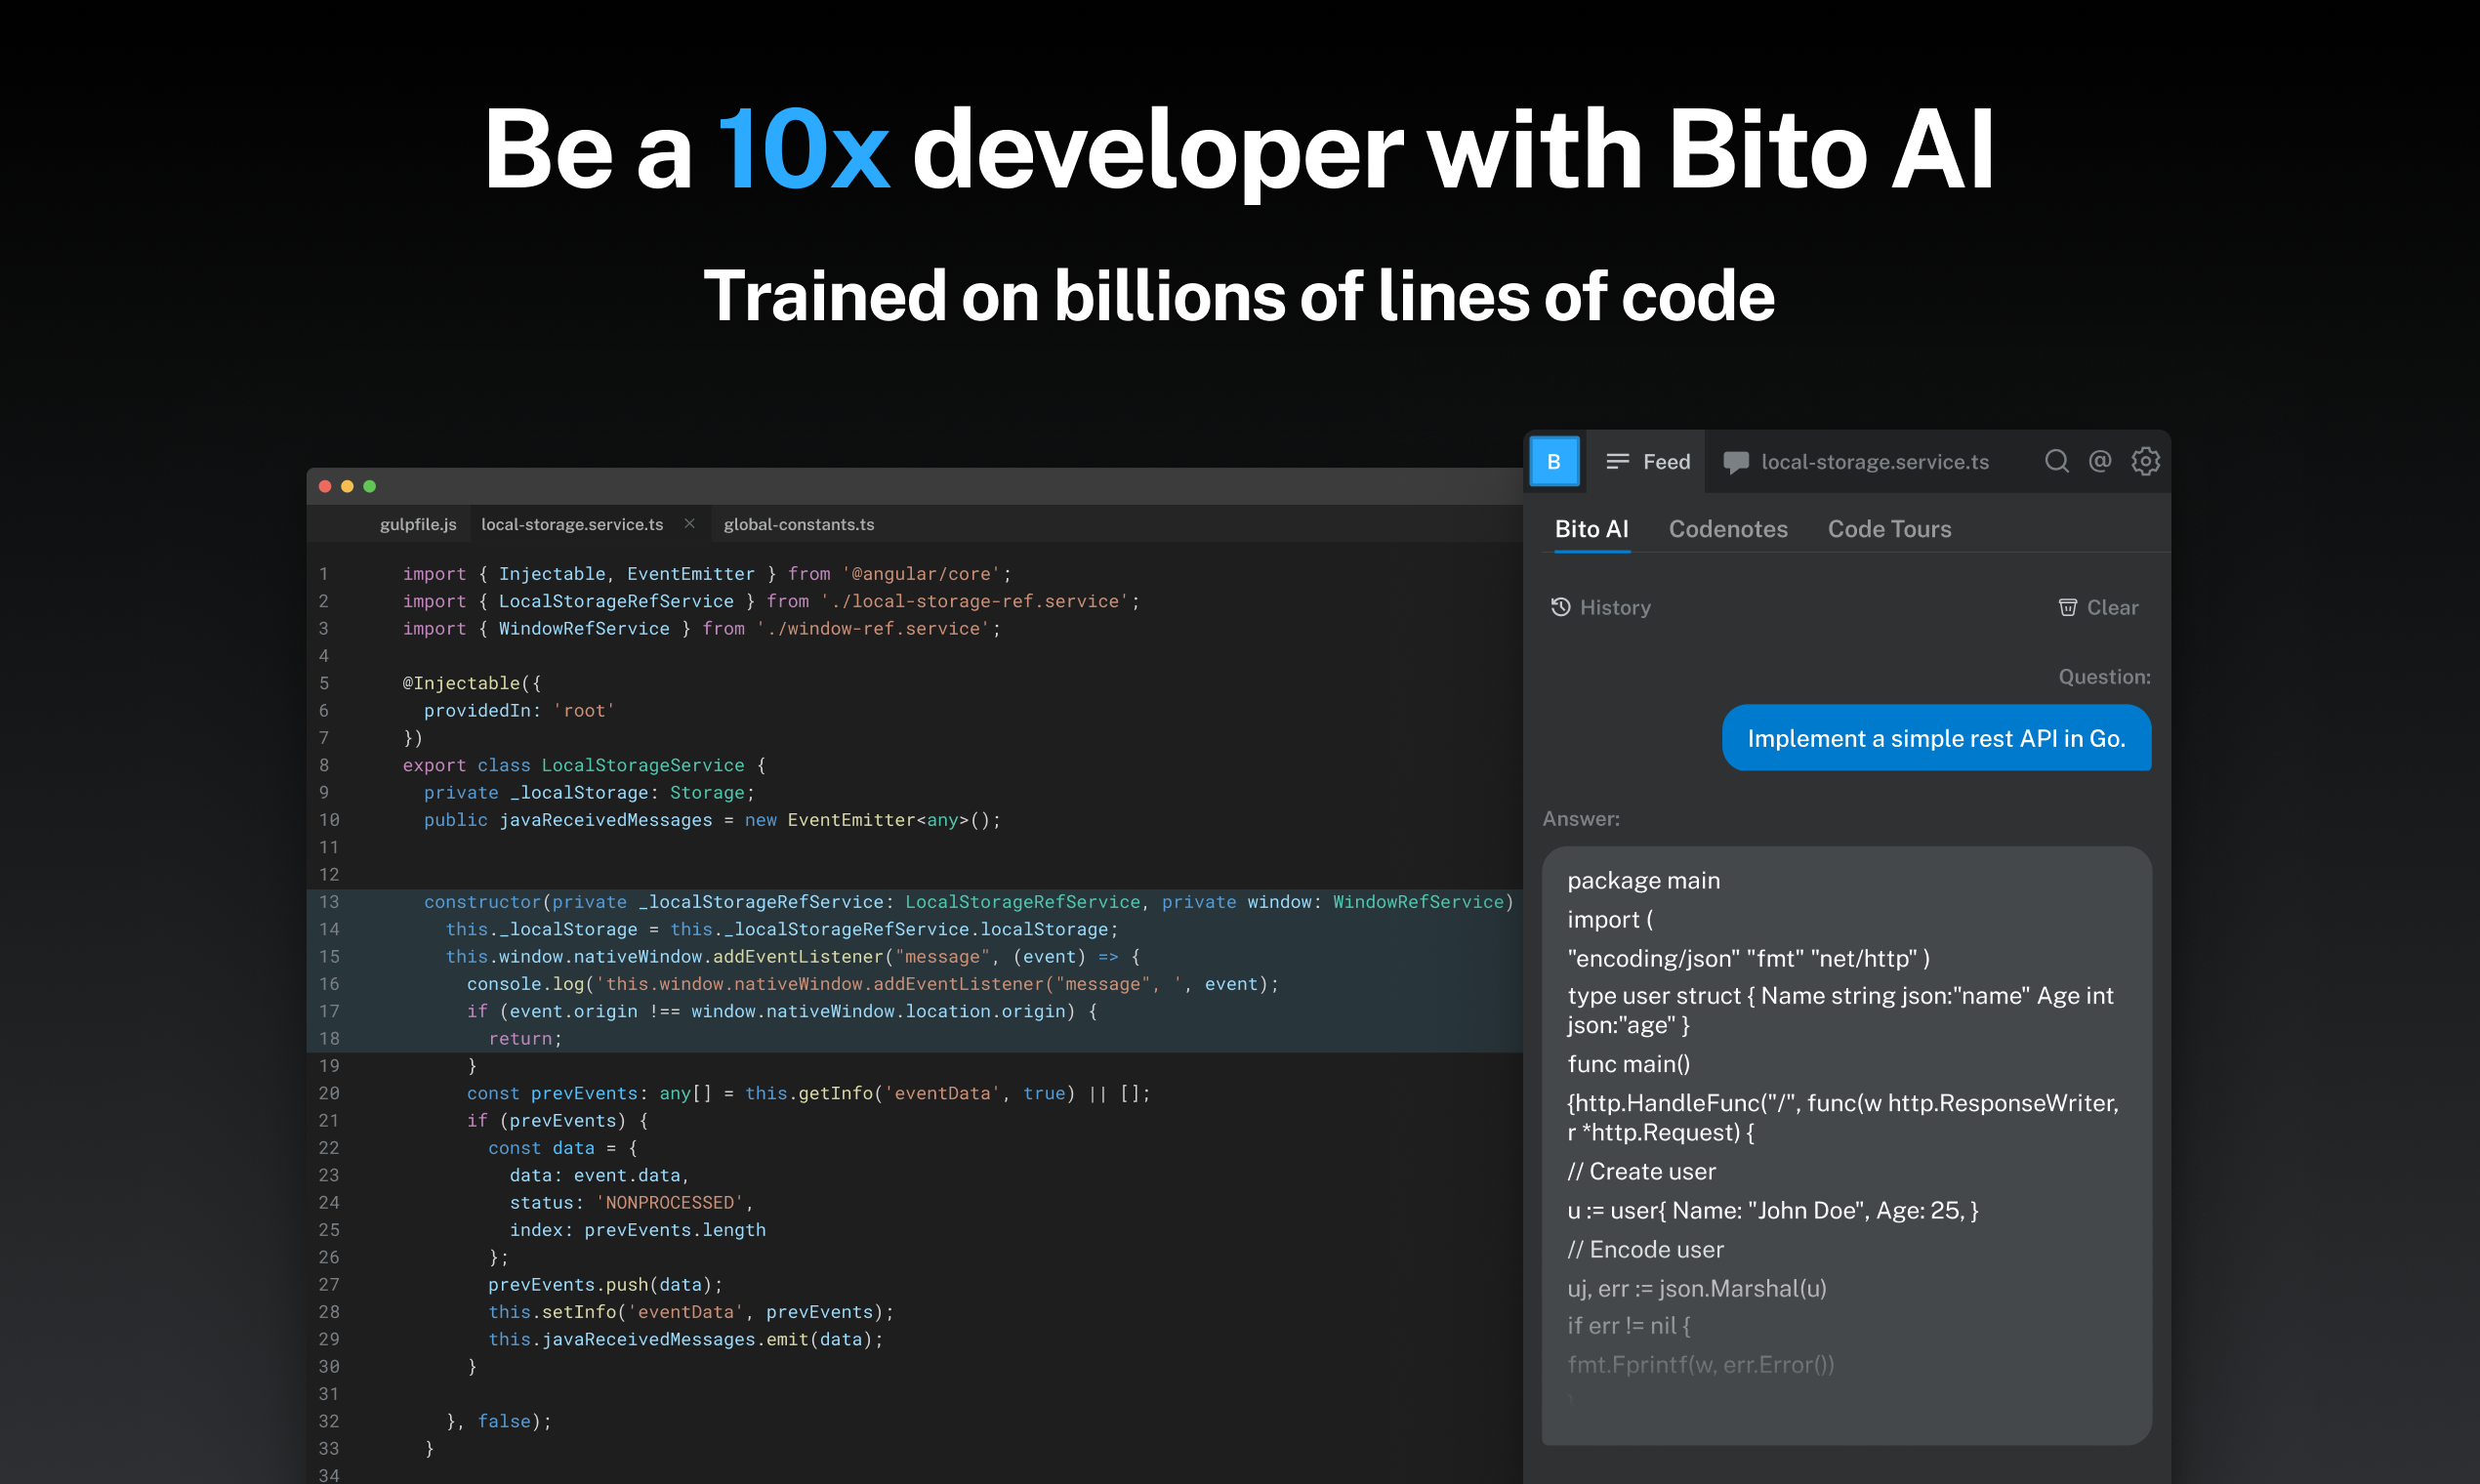 Bito - A suite of coding tools for developers